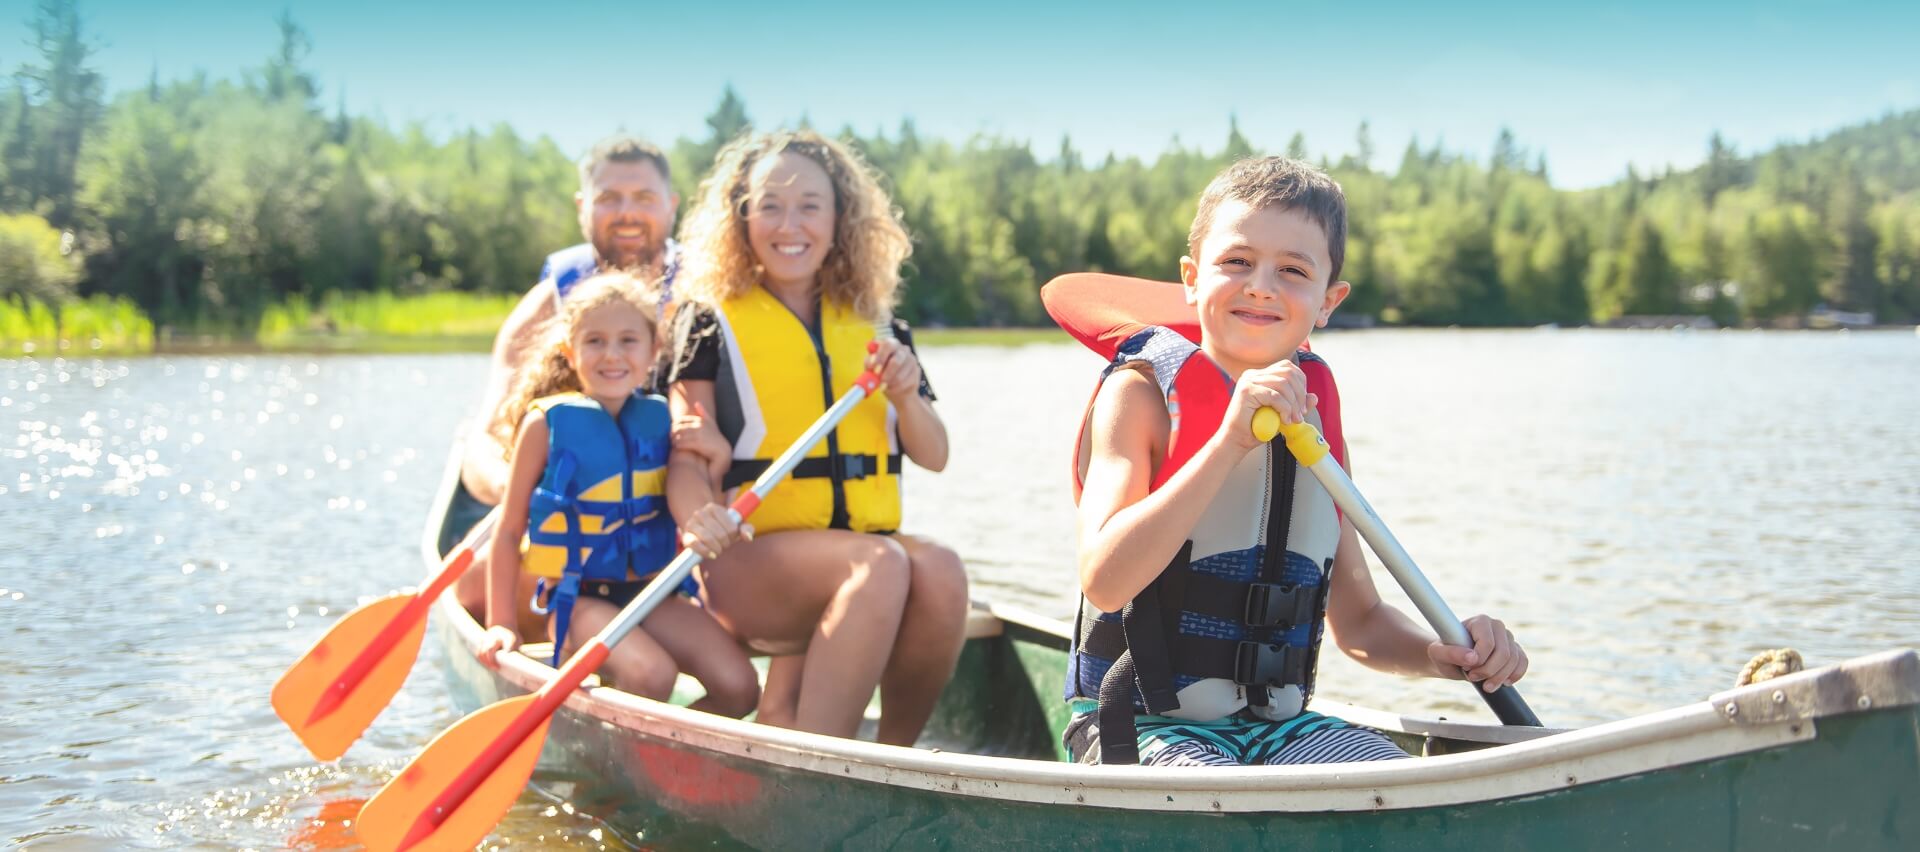 Family canoeing activity on Lake Pareloup